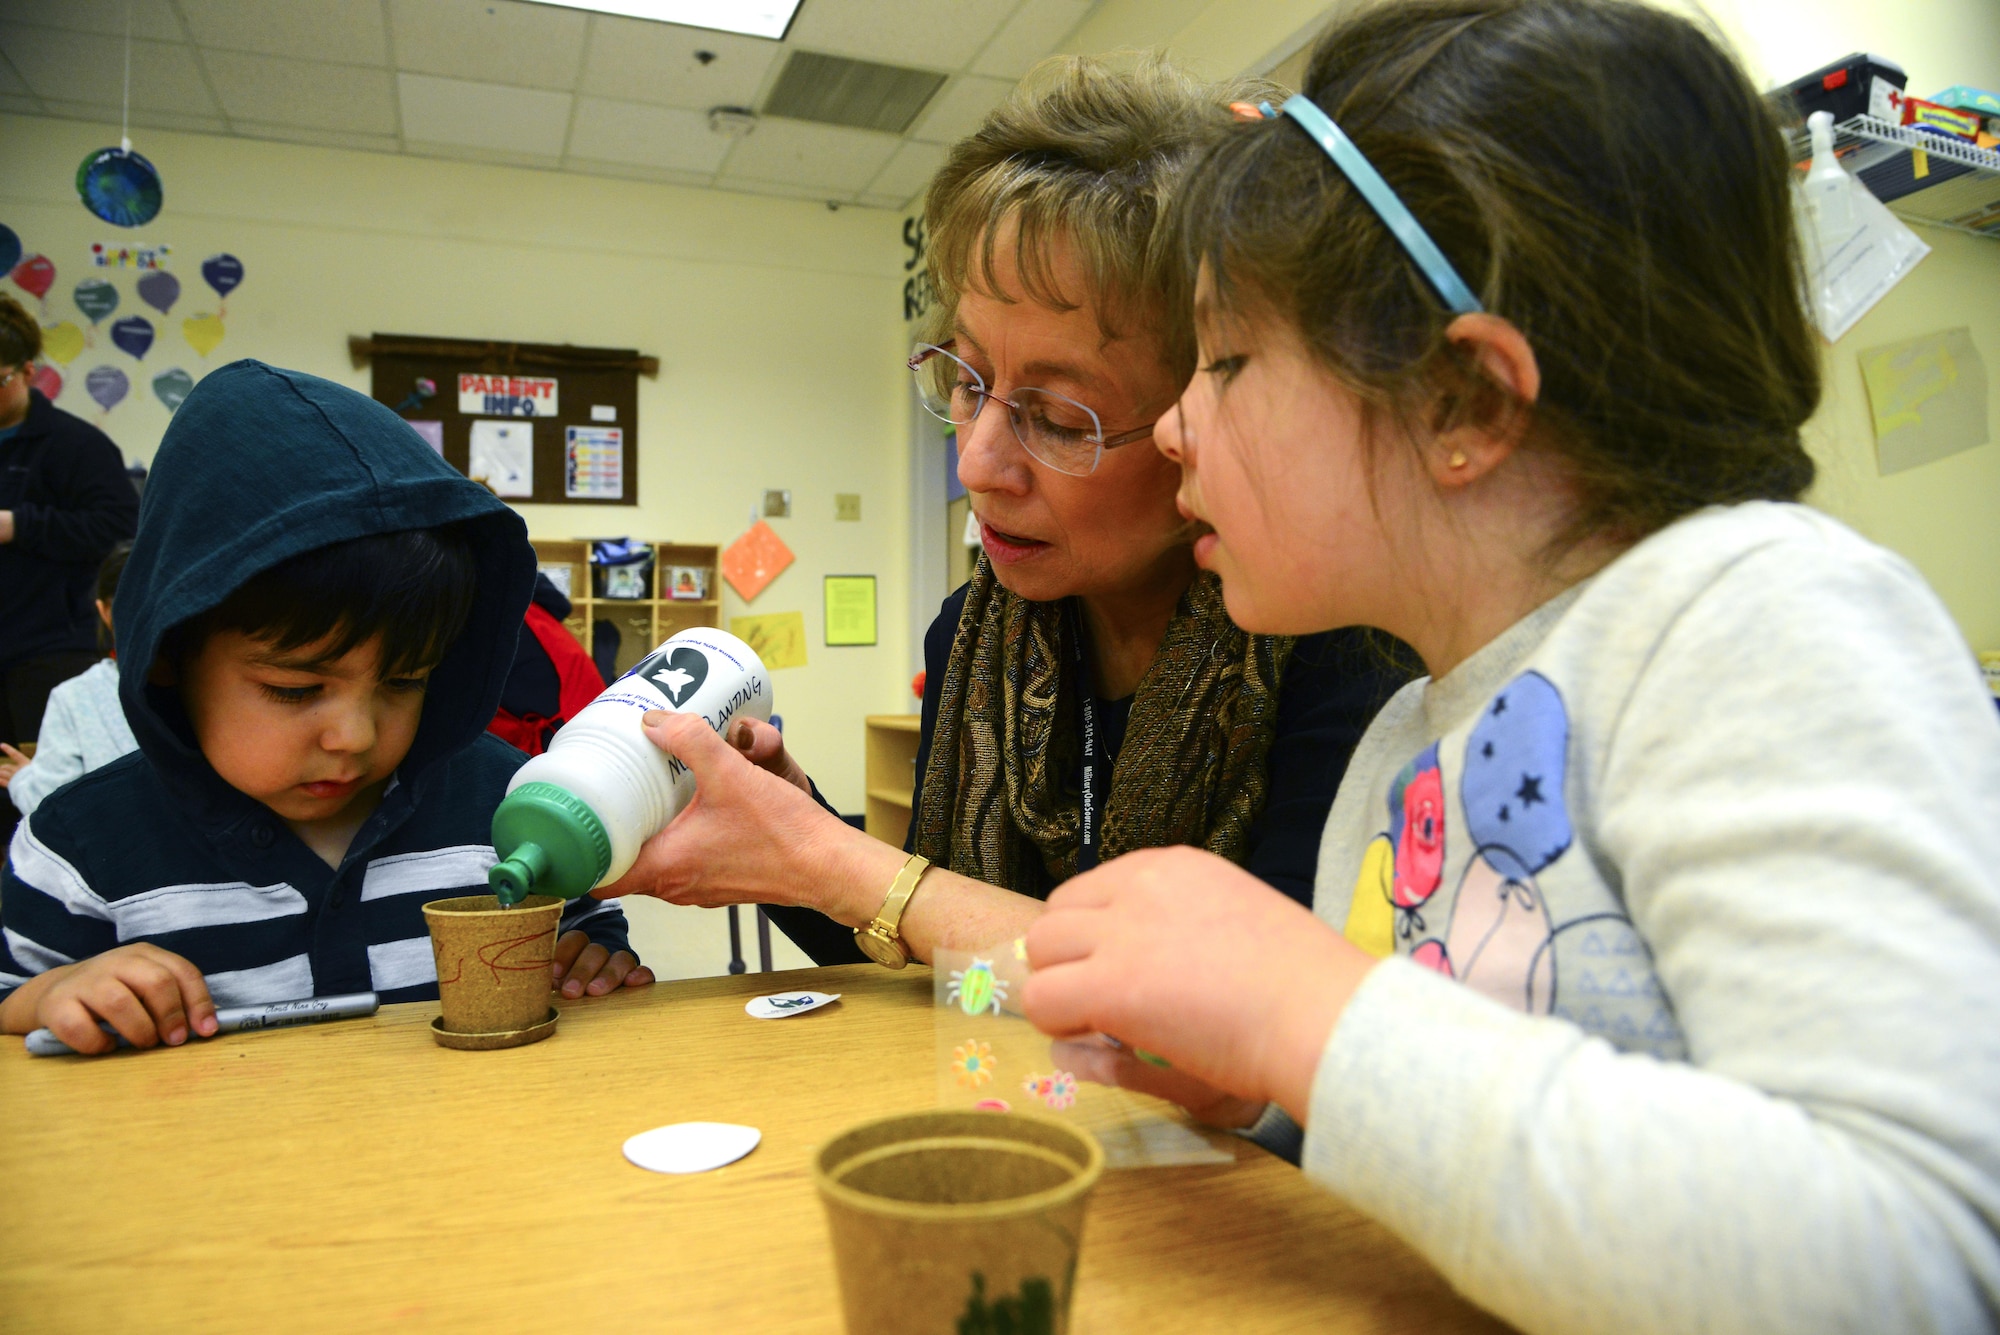 Kids from the Child Development Center observe as Diane Wulf, 92nd Civil Engineer Squadron pollution prevention program manager, pours water into a mini planter during the Earth Day celebration Apr. 20, 2017, at Fairchild Air Force Base, Washington. Airmen observed the day by reading stories relating to Earth Day to children and had them plant their own seeds in a mini planter. (U.S. Air Force photo/Senior Airman Janelle Patiño)